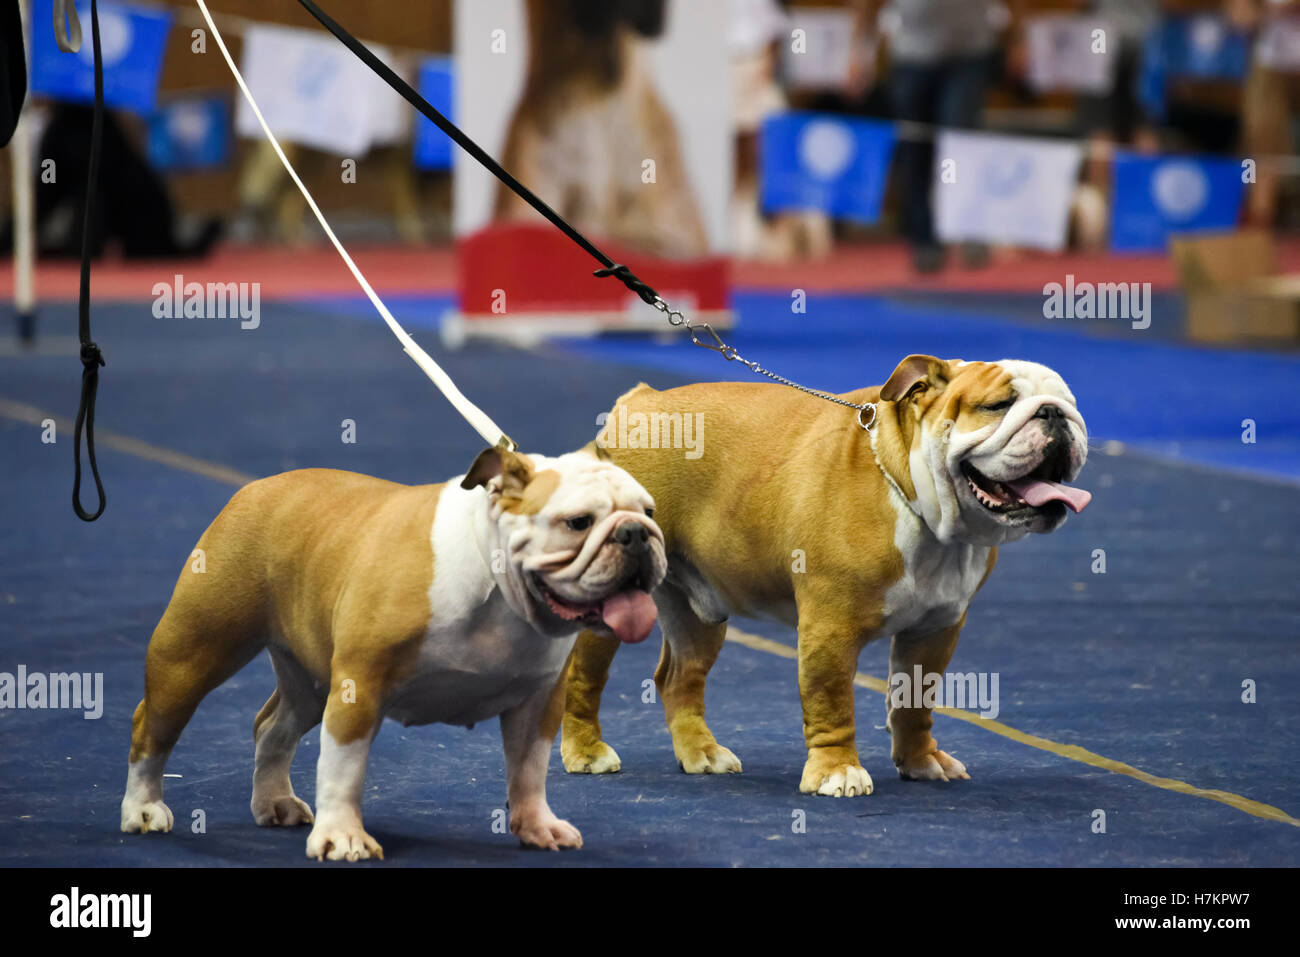 Two English Bulldogs paraded at a dog show Stock Photo